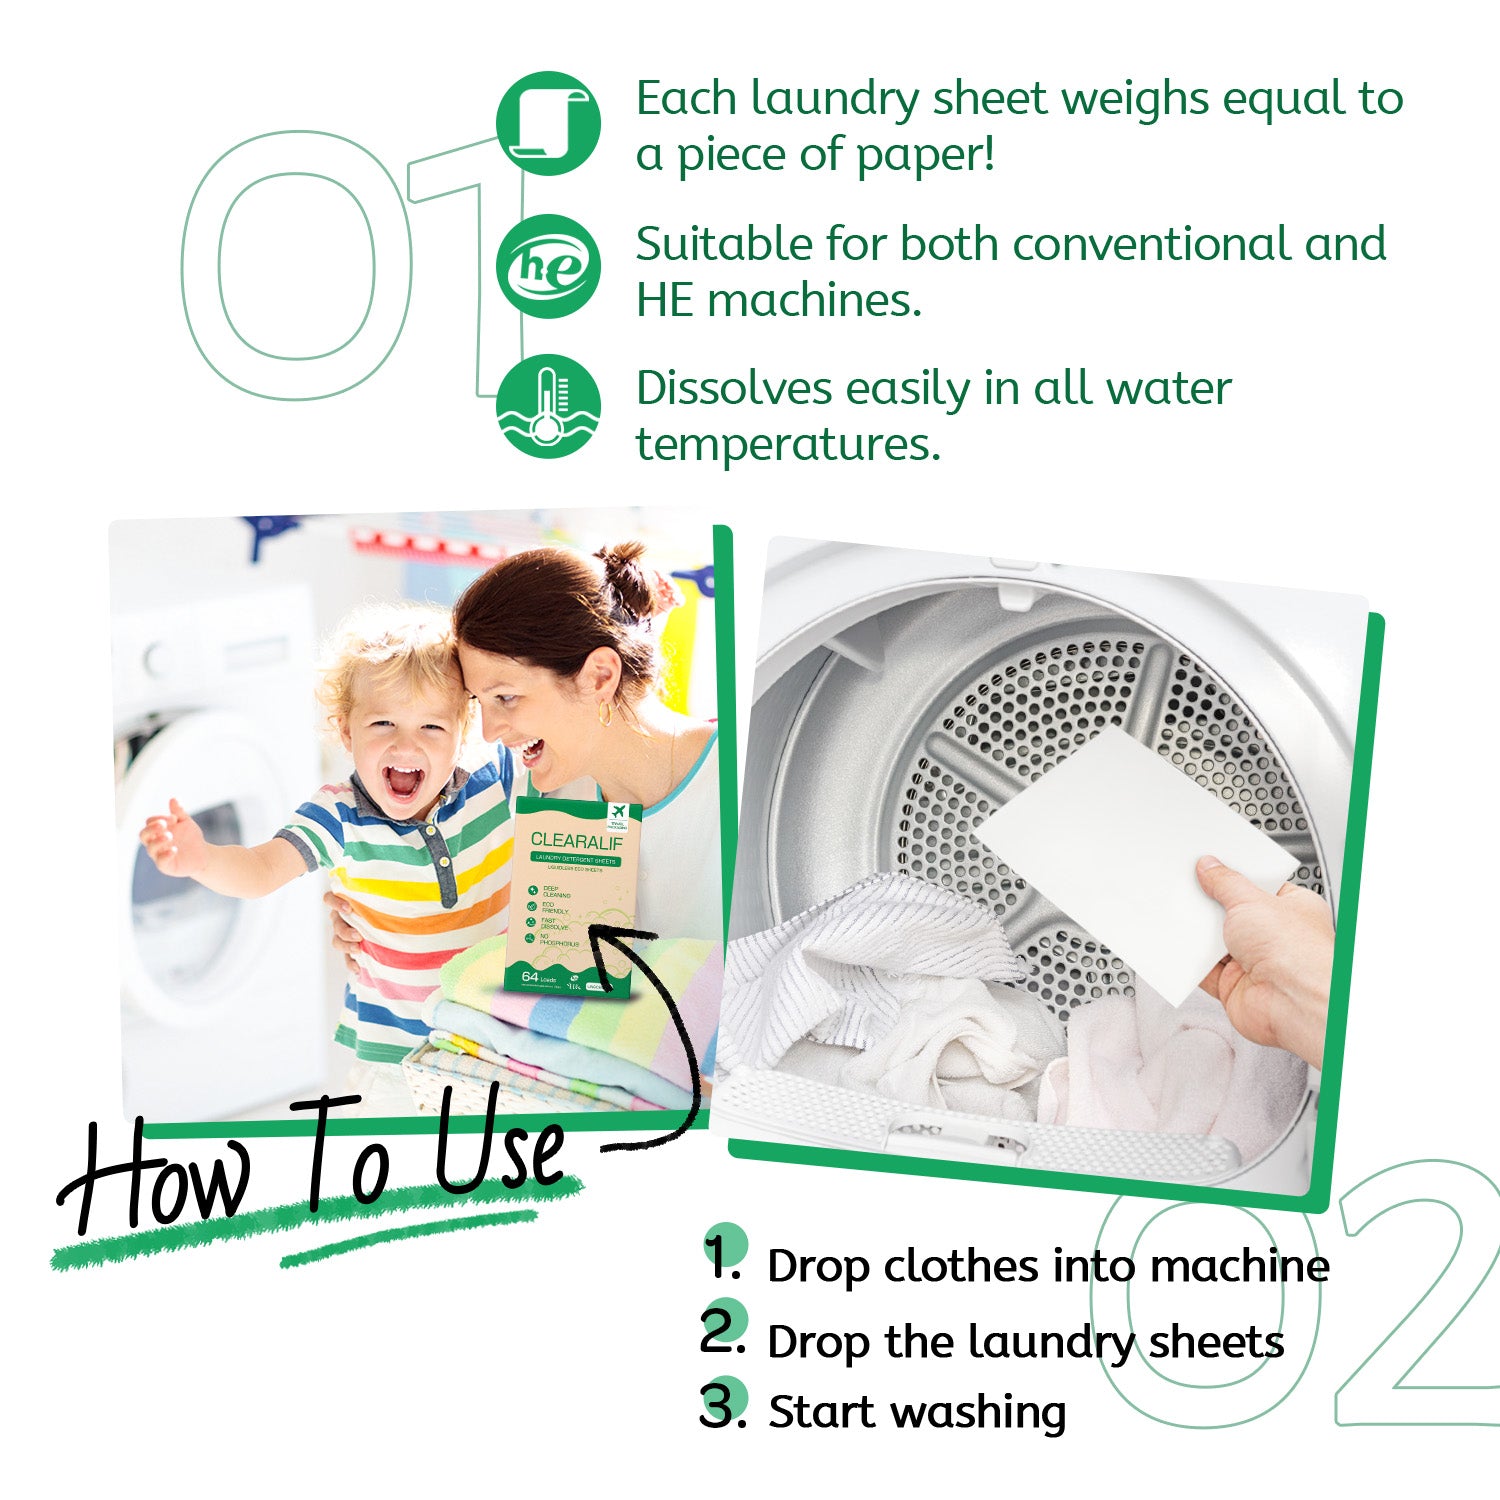 CLEARALIF Eco Friendly & Hypoallergenic Laundry Detergent Sheets 64 Loads, Unscented